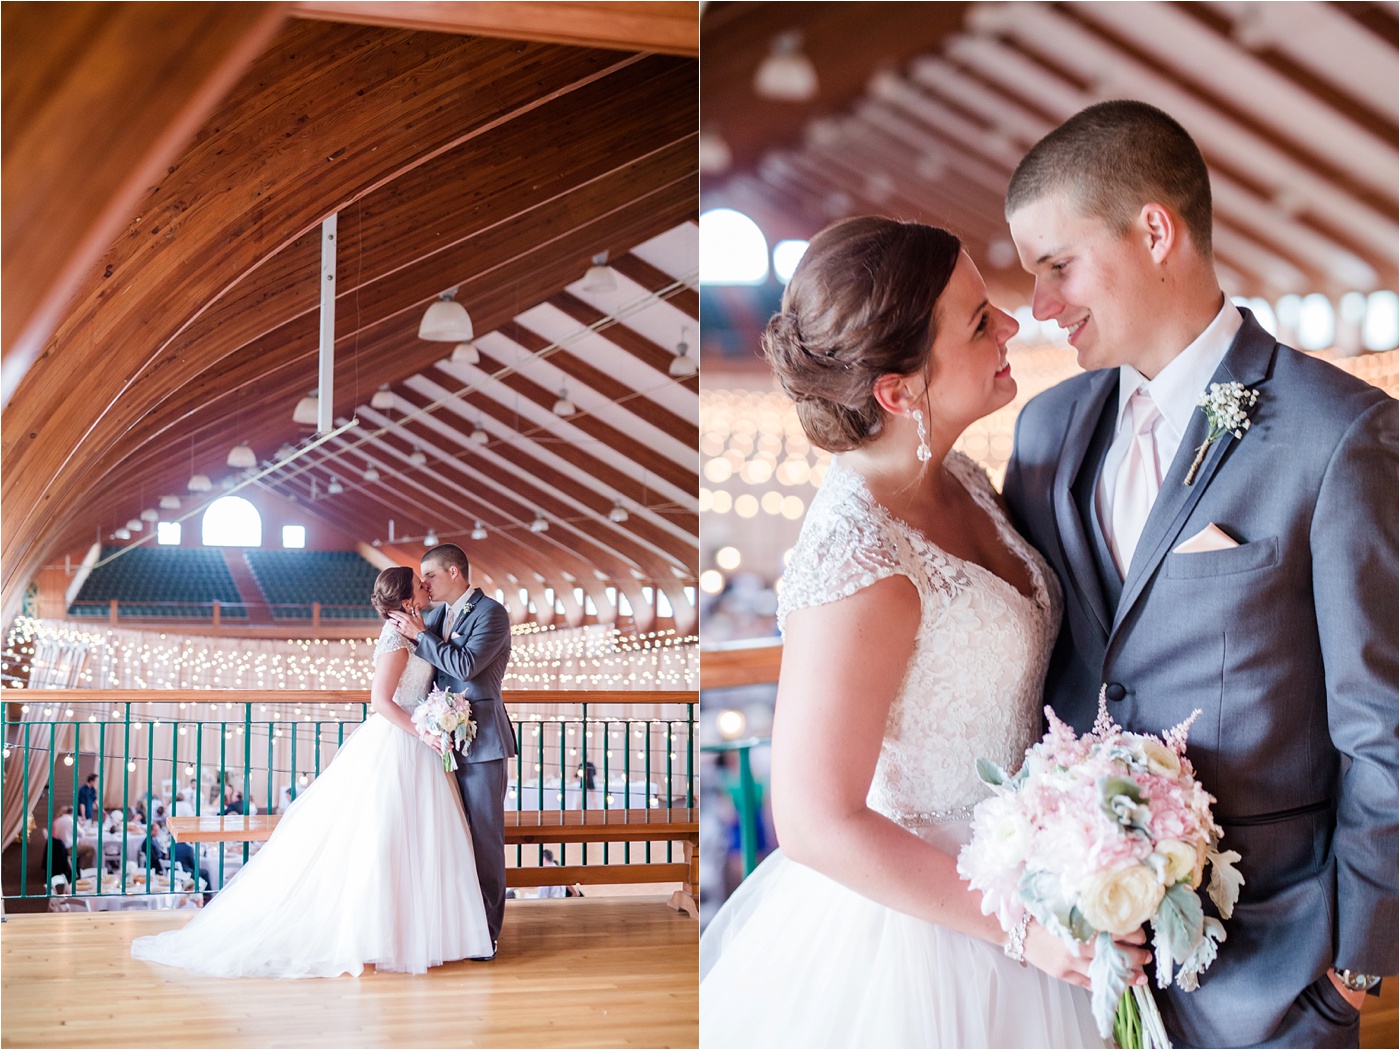 A Blush Outdoor wedding at Irongate Equestrian | KariMe Photography_0158